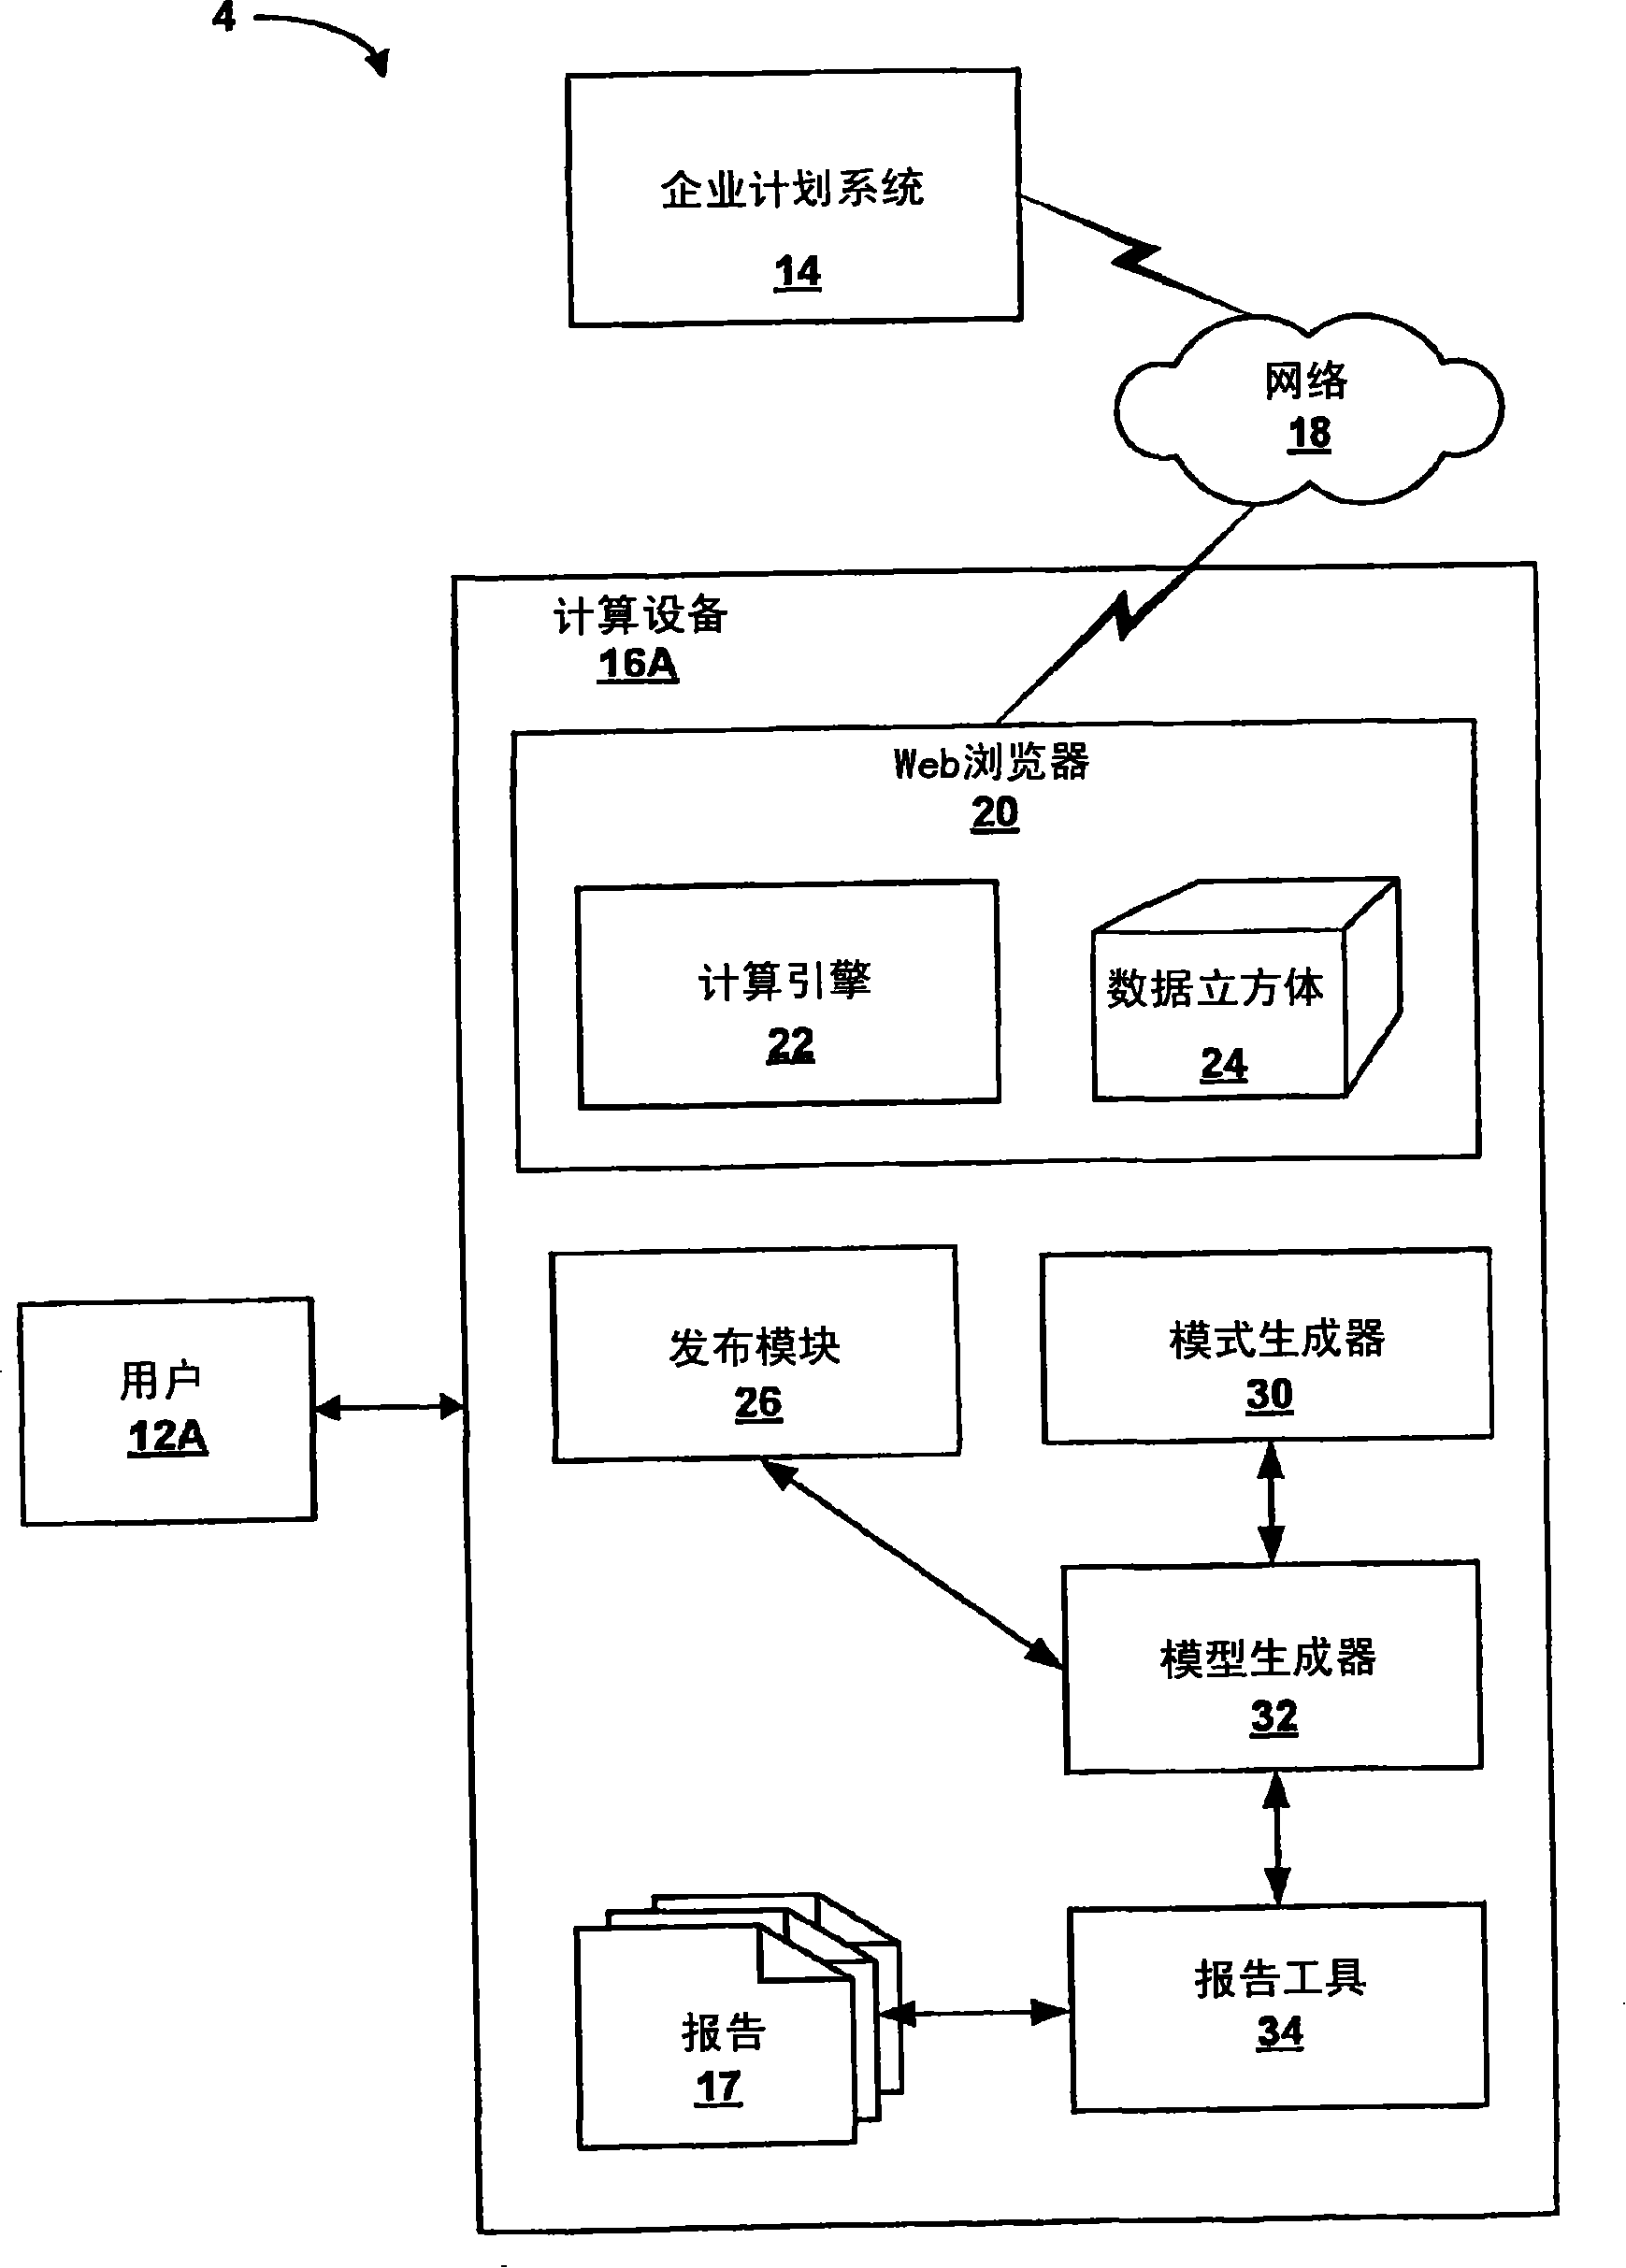 Generation of aggregatable dimension information within a multidimensional enterprise software system